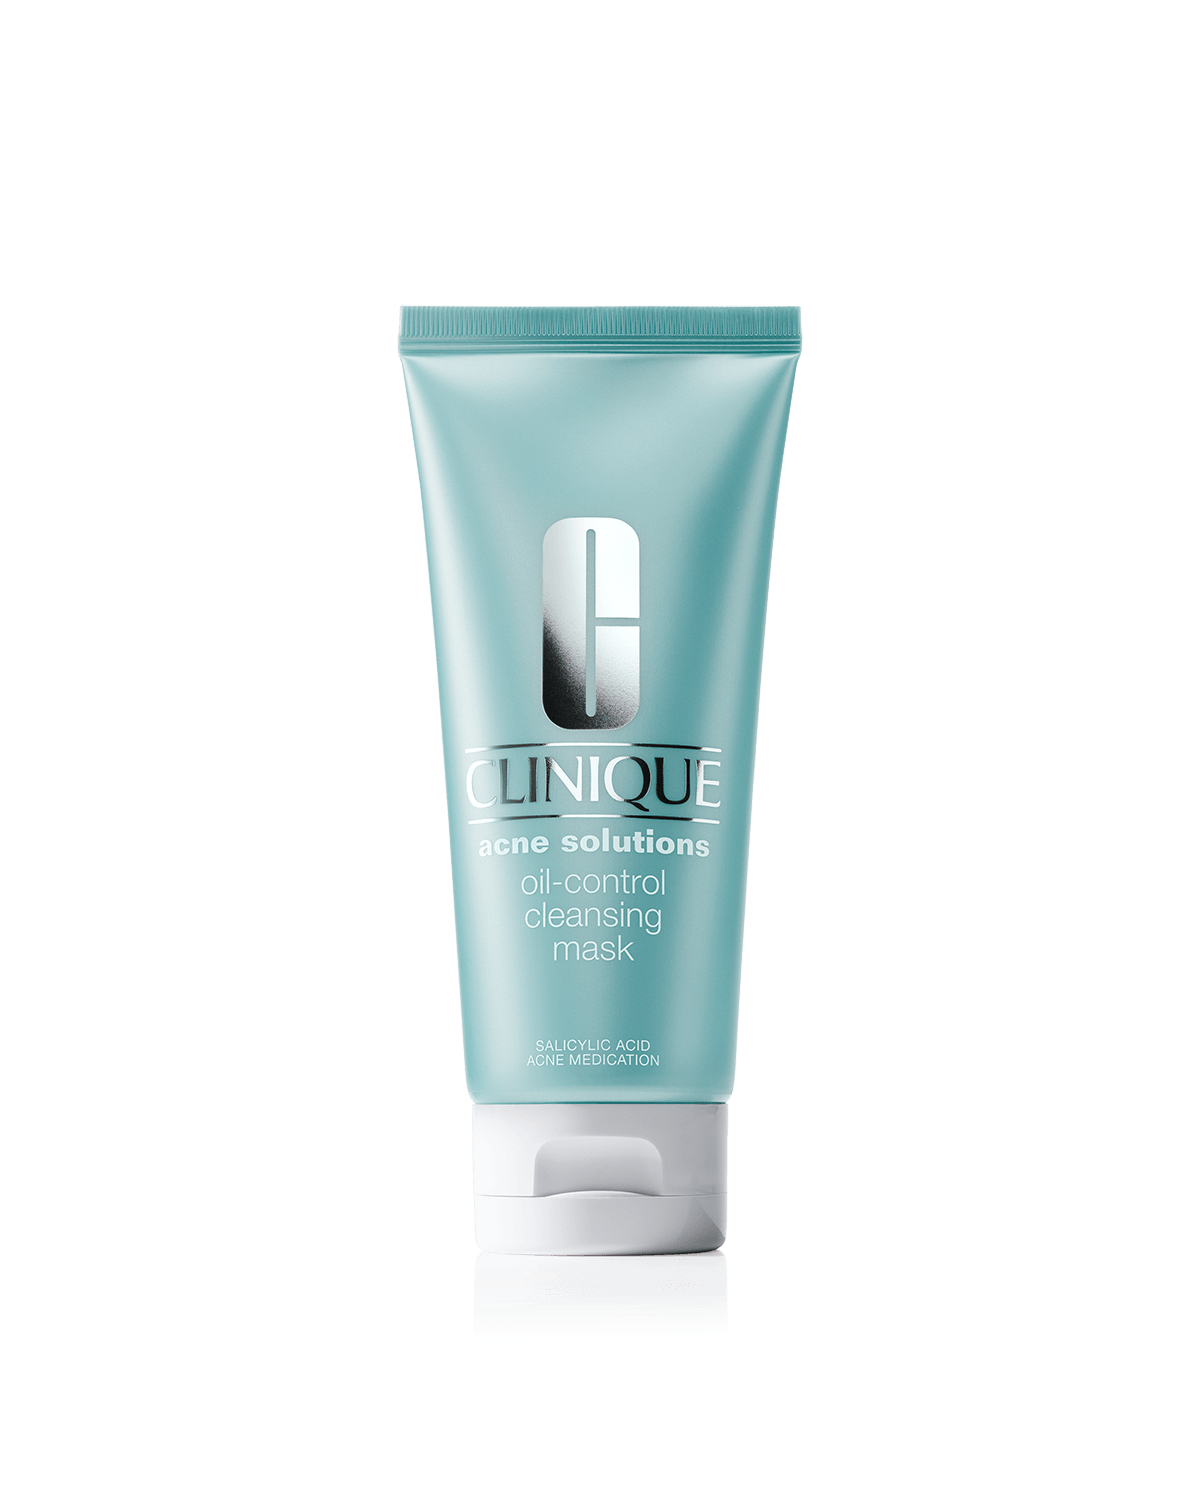 Acne Solutions Oil Control Cleansing Mask Clinique